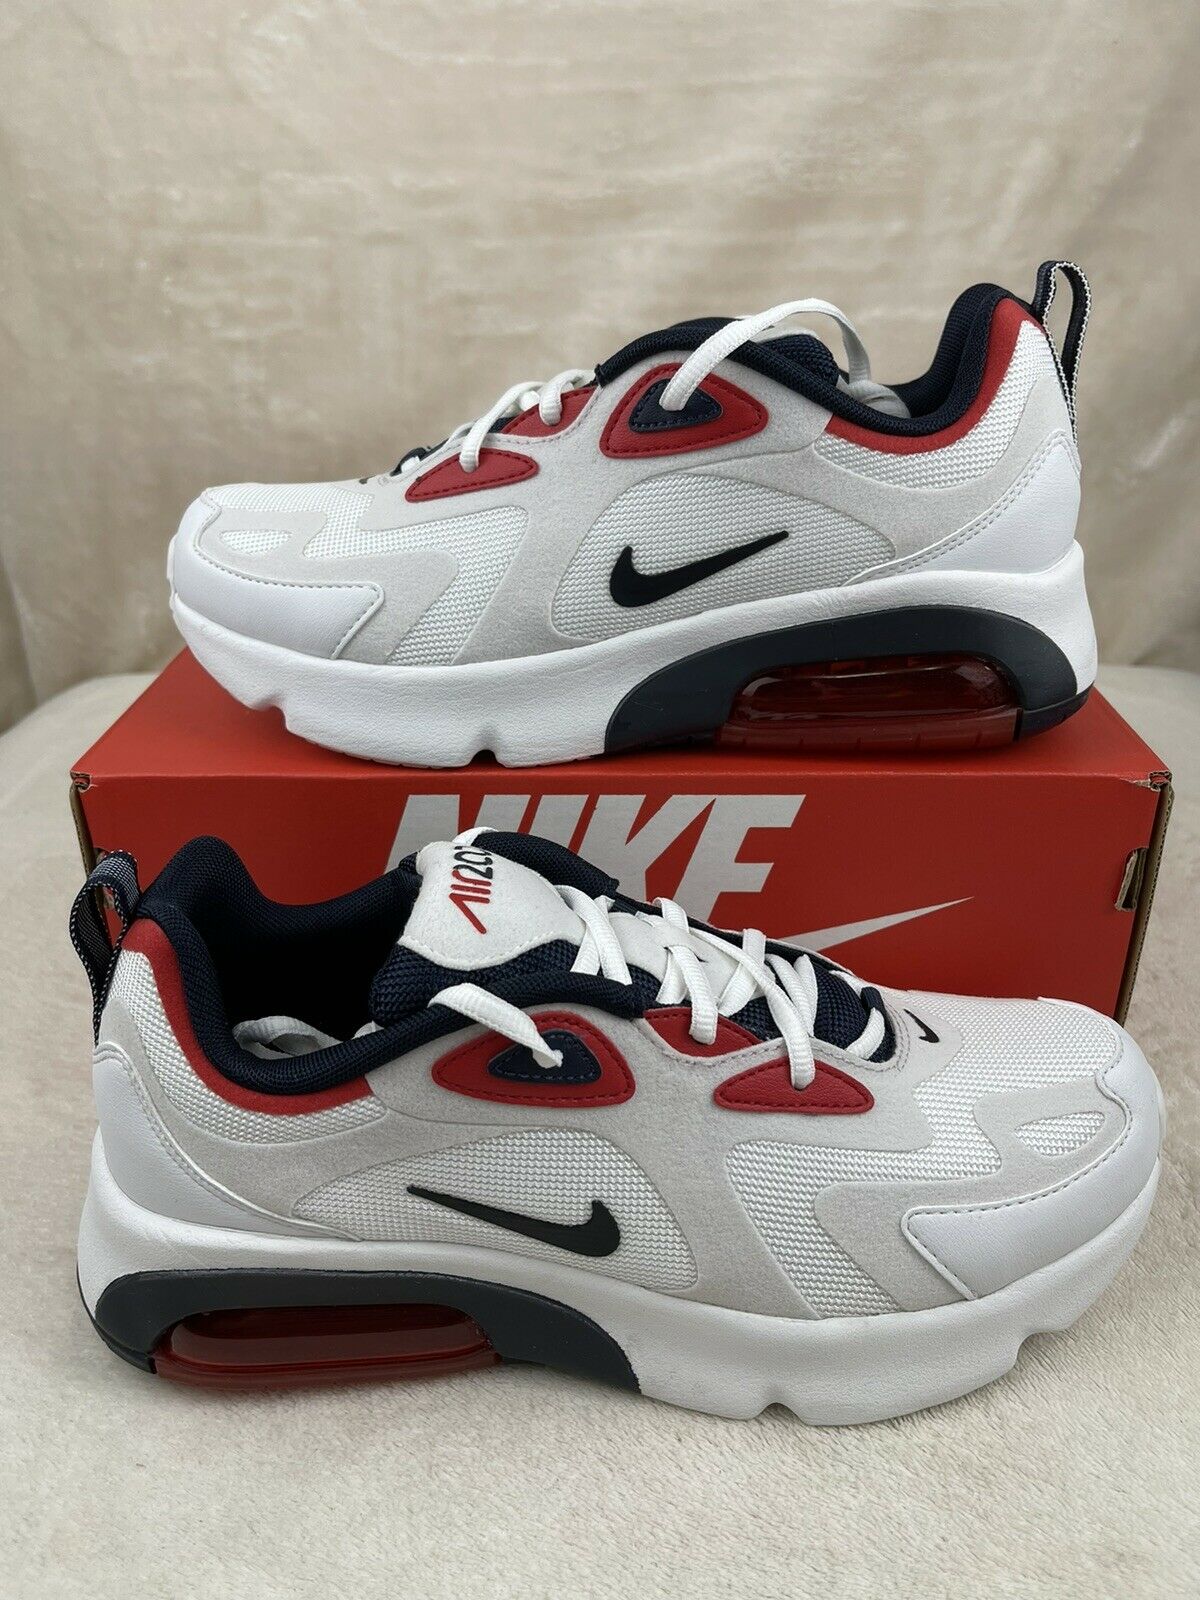 Nike Air Max 200 Womens Size 8.5 (7Y) Shoes Summit White Obsidian